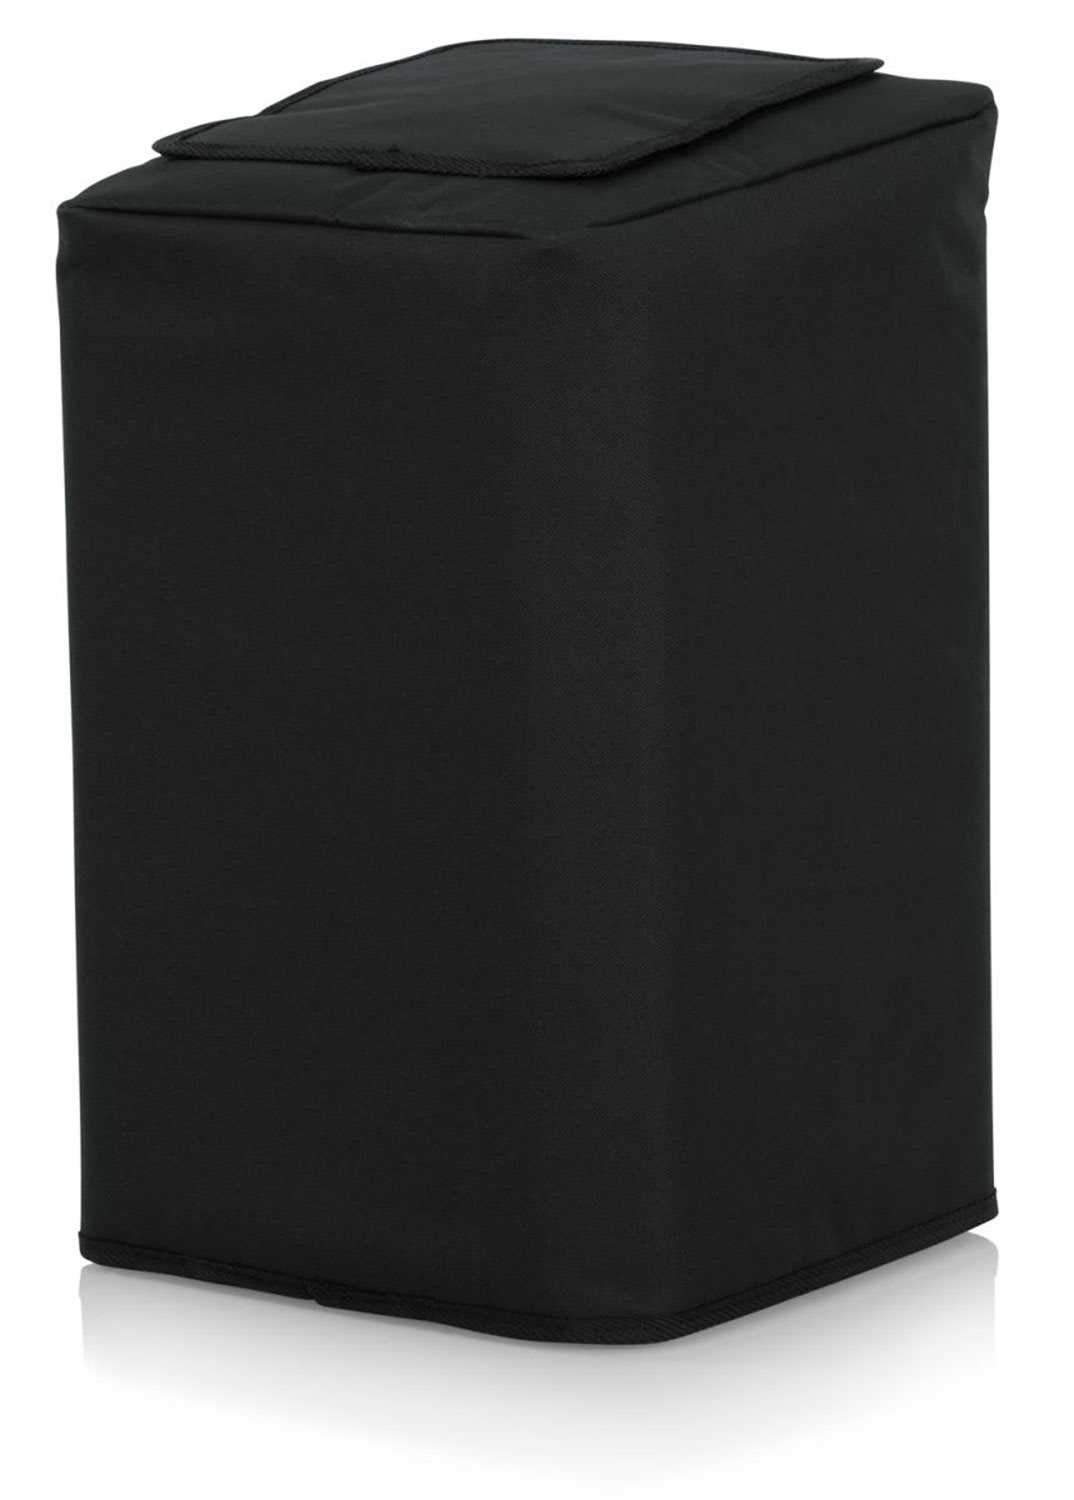 Gator GPA-CVR8 Nylon Cover for 8 Inch Speakers - ProSound and Stage Lighting